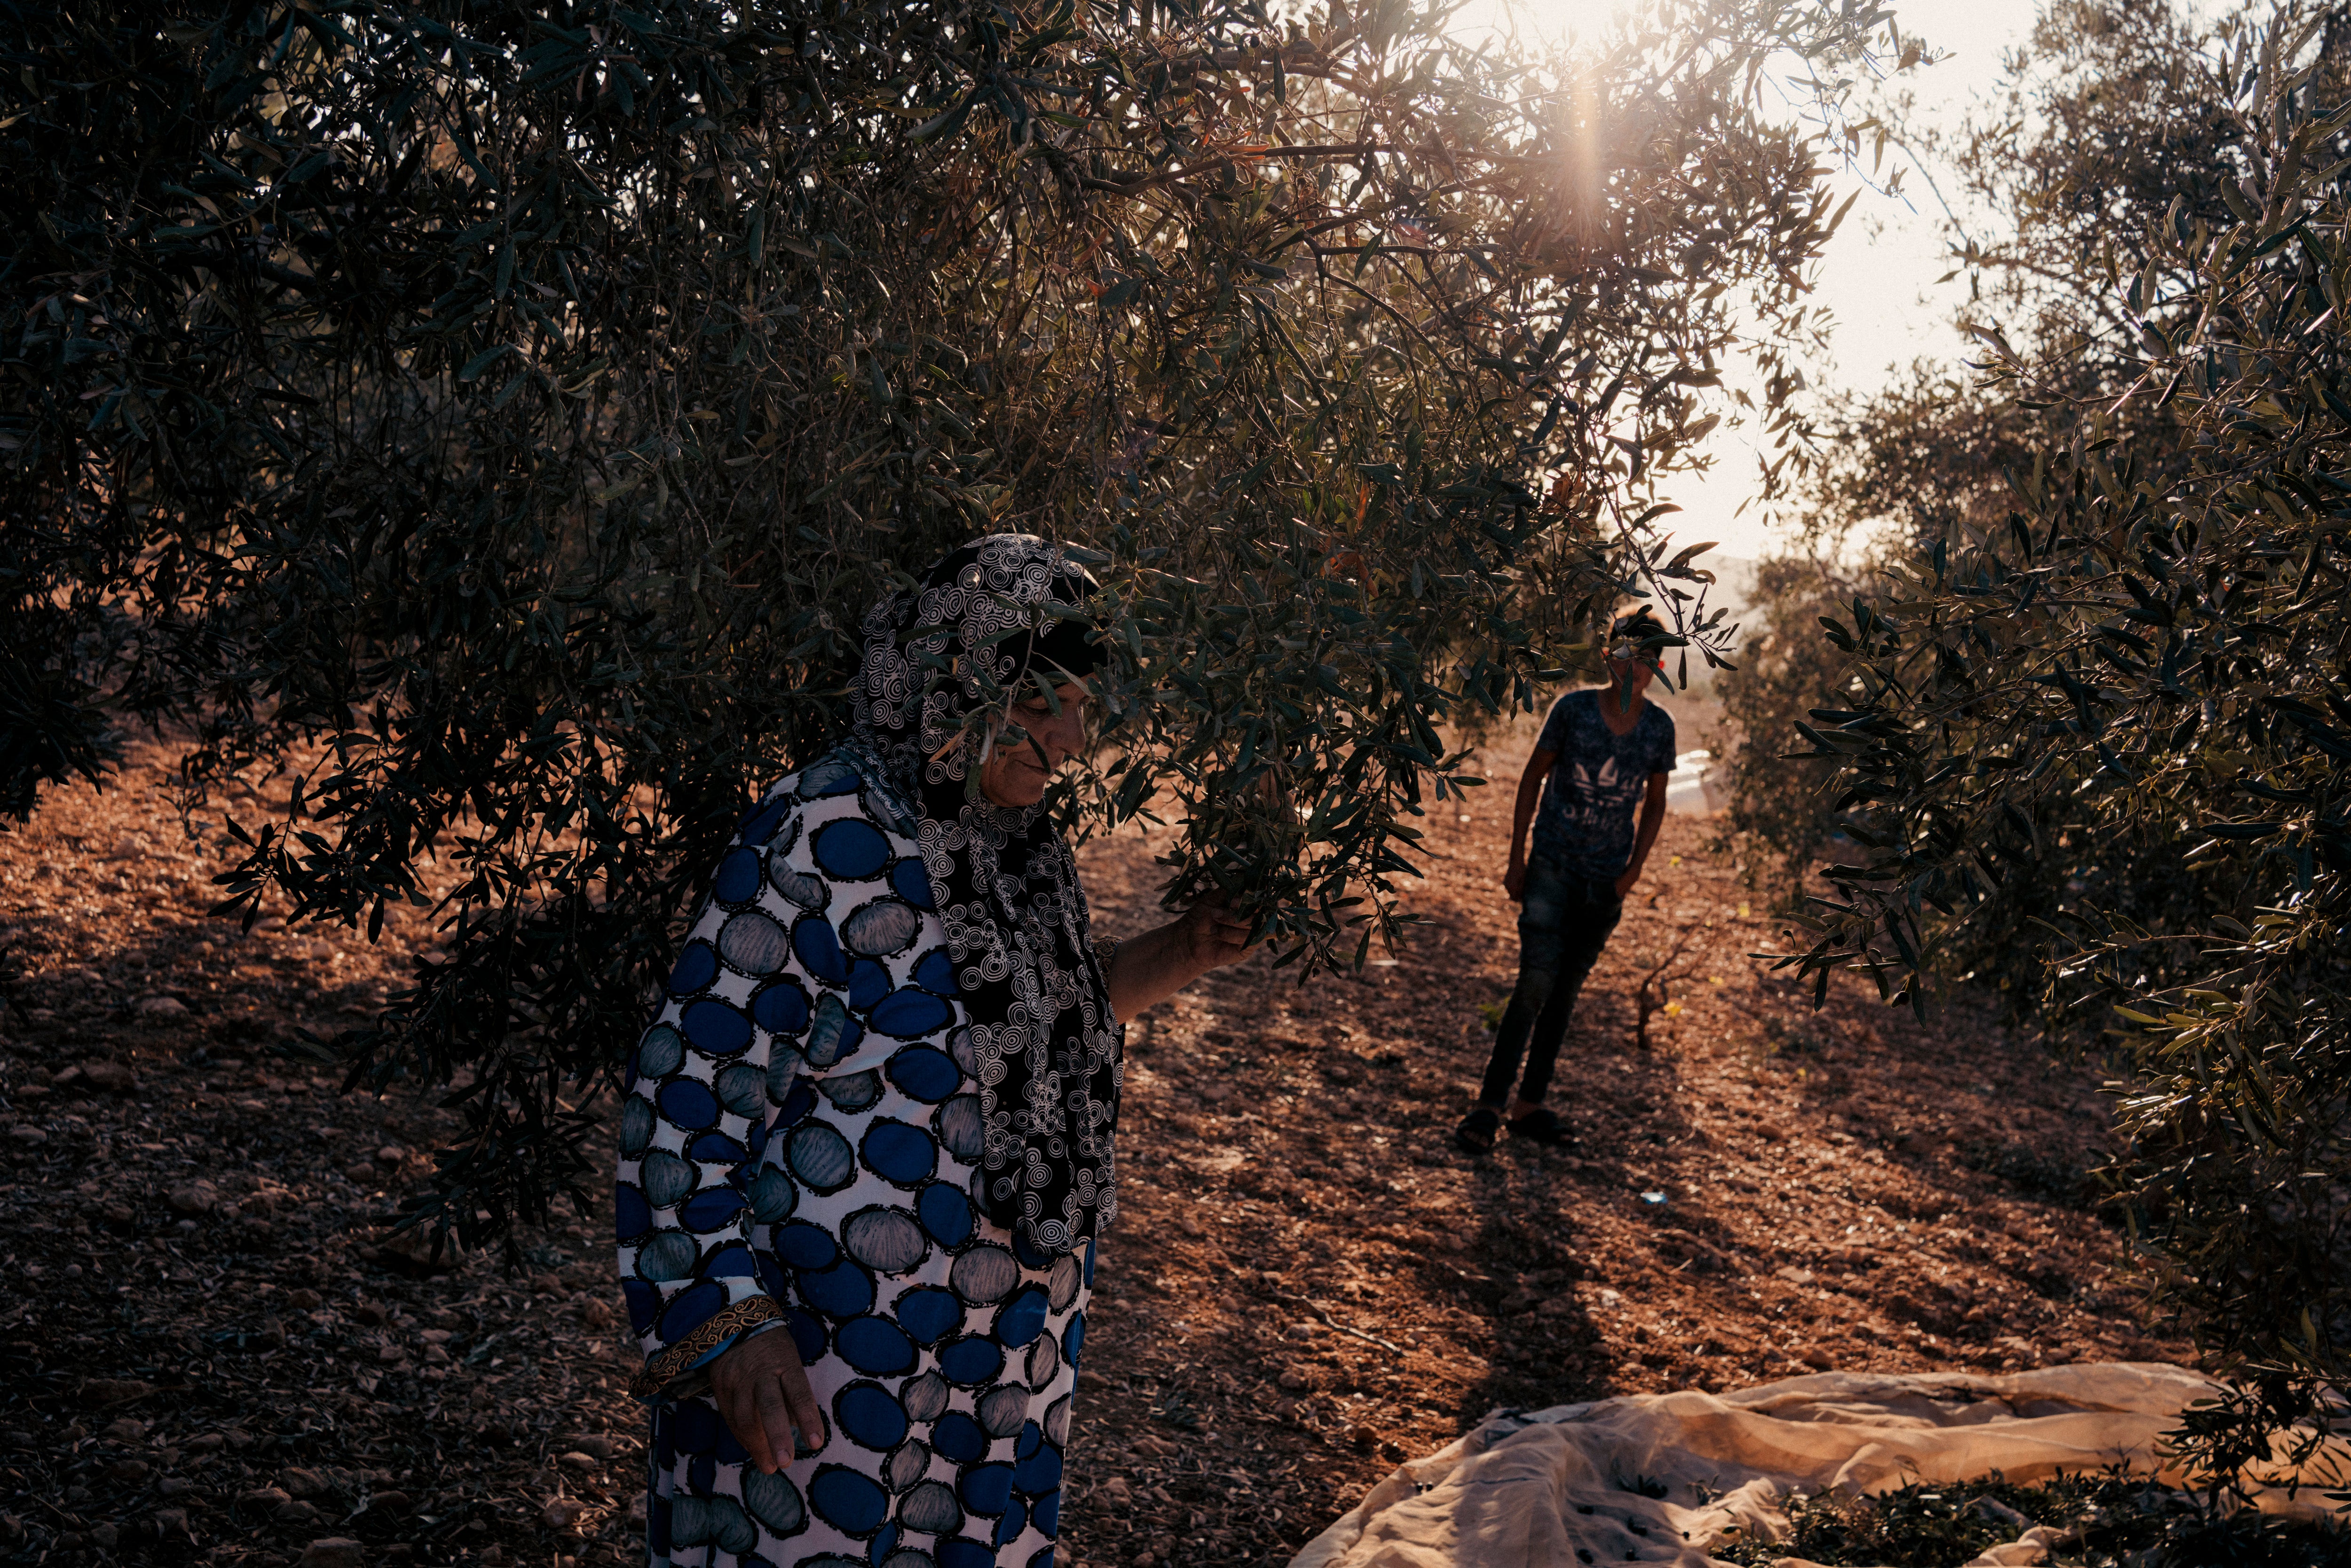 Palestinians pick olives near their village. Settler attacks tend to increase during the olive-picking season, preventing Palestinians accessing their land